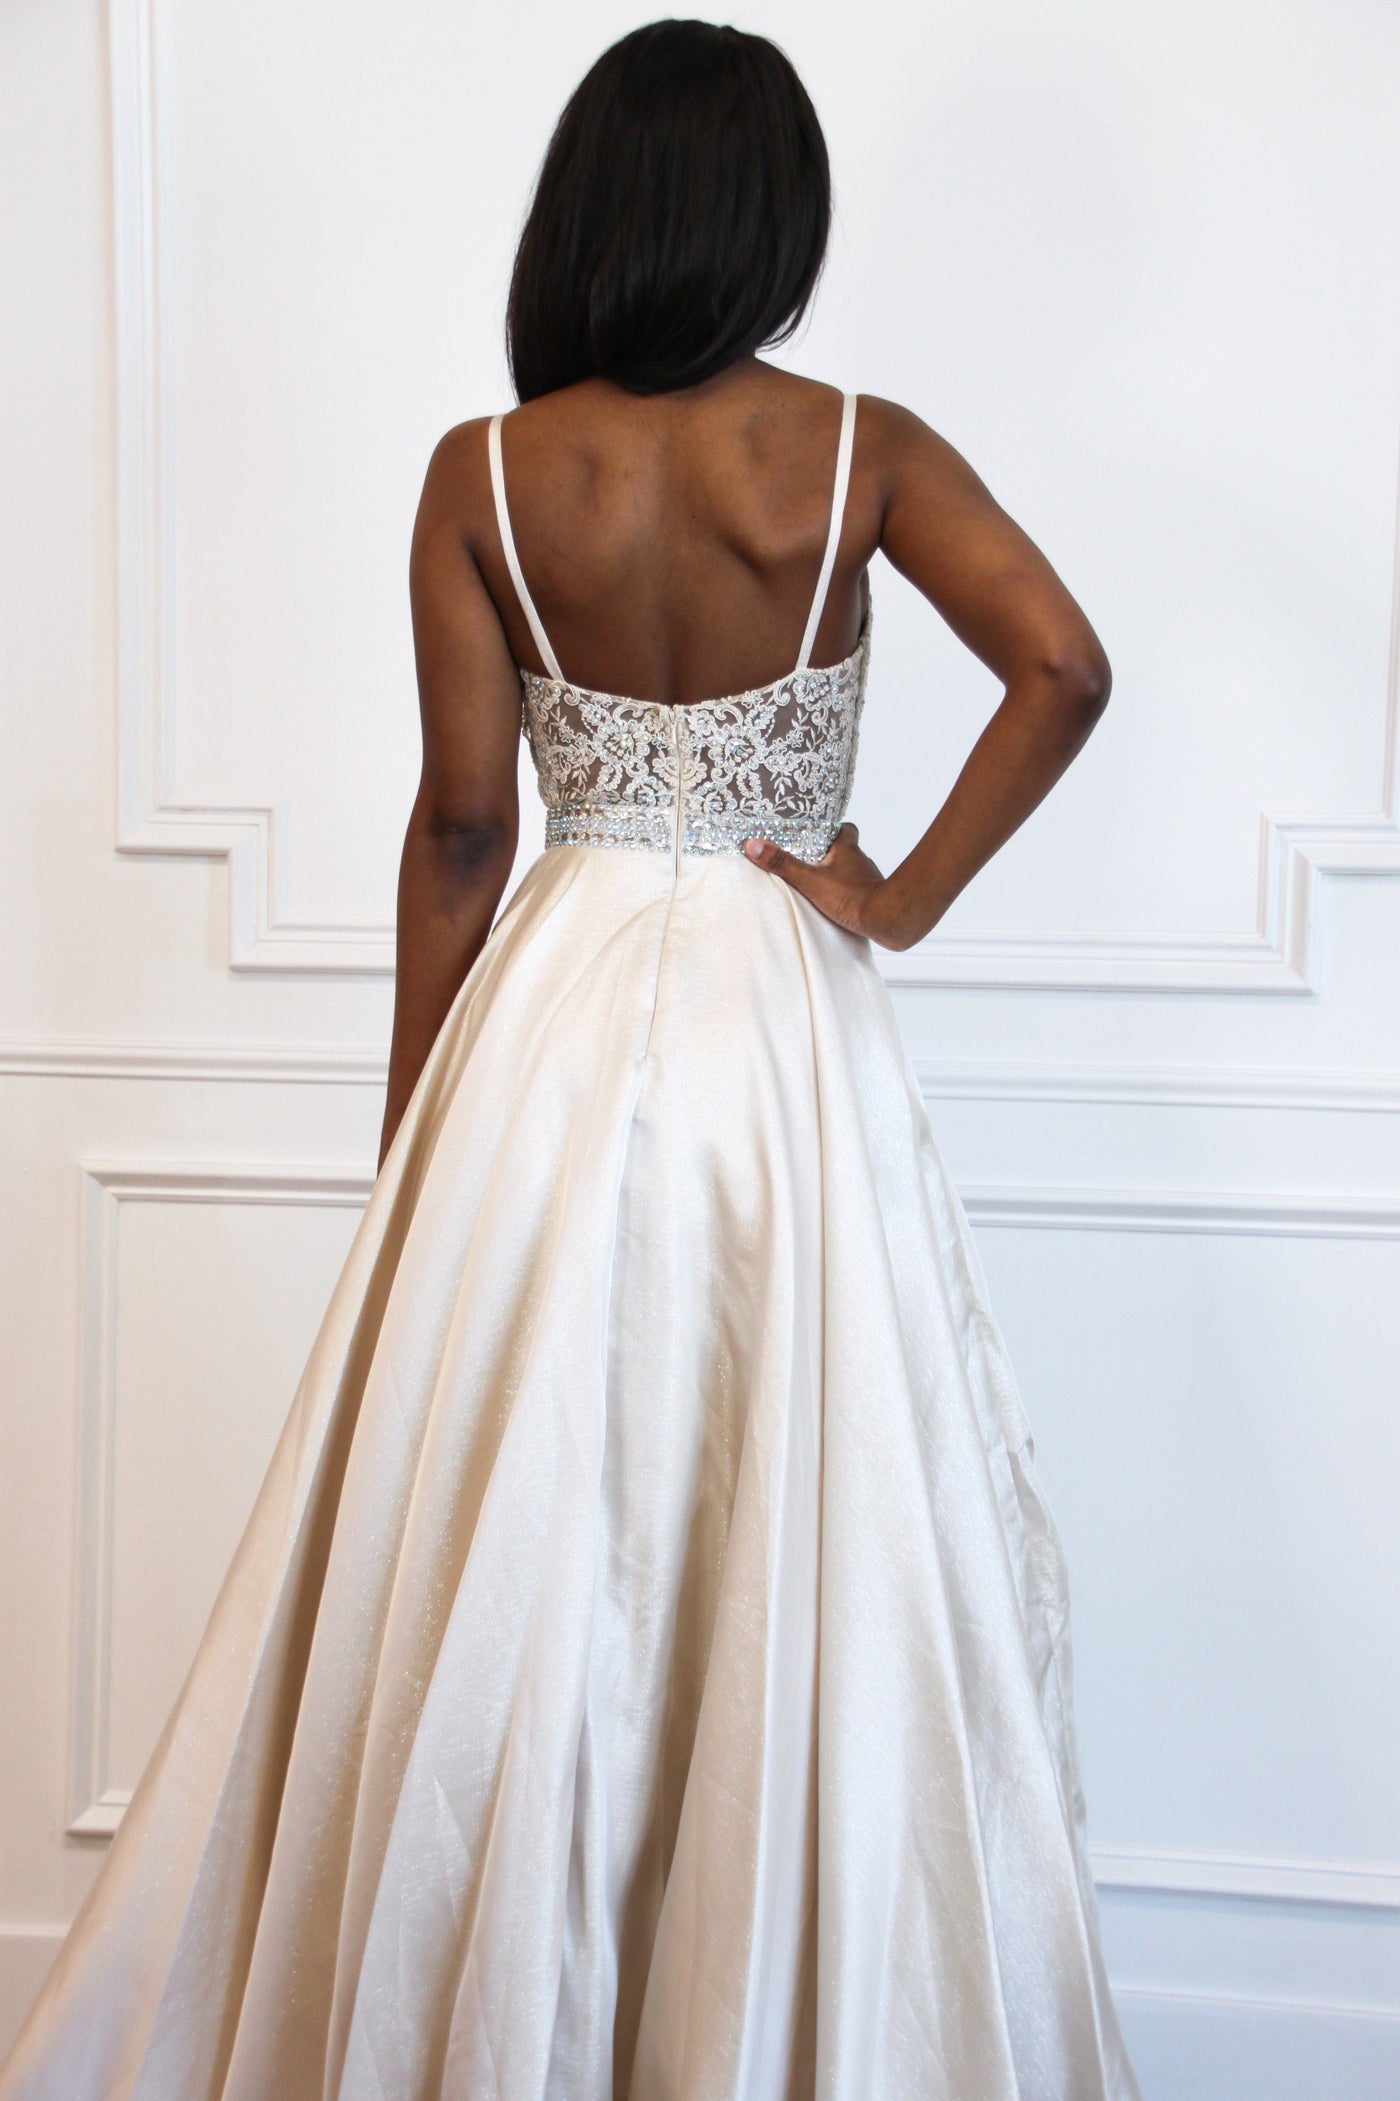 Kiss Me Goodnight Ball Gown Wedding Dress: Champagne - Bella and Bloom Boutique